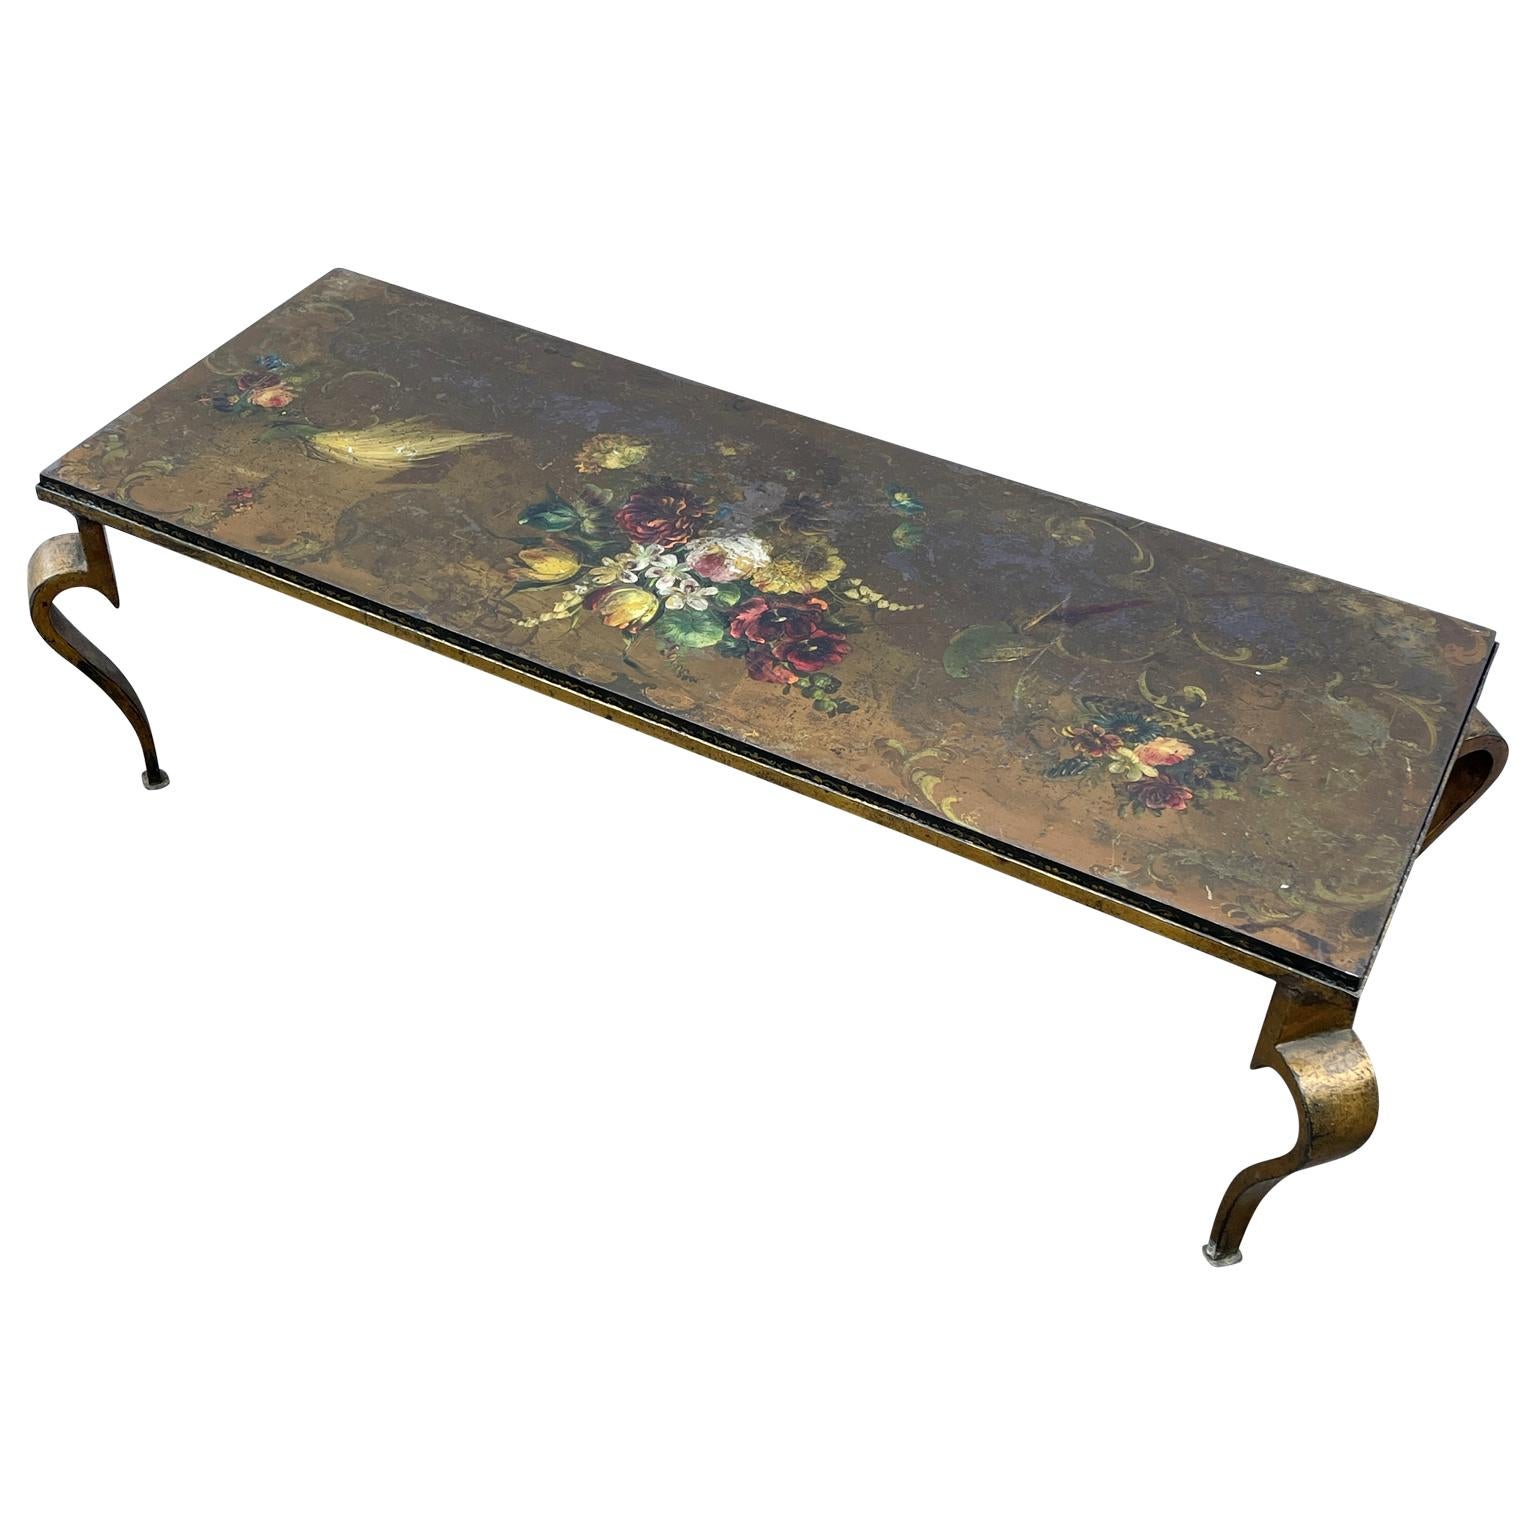 An amazing and rare hand-painted thick slate top and rectangular gilt patinated iron cocktail table, vintage Mid-20th Century Italy.
The vintage 1 inch thick slate top has beautiful hand-painted decorations of birds and flowers.
